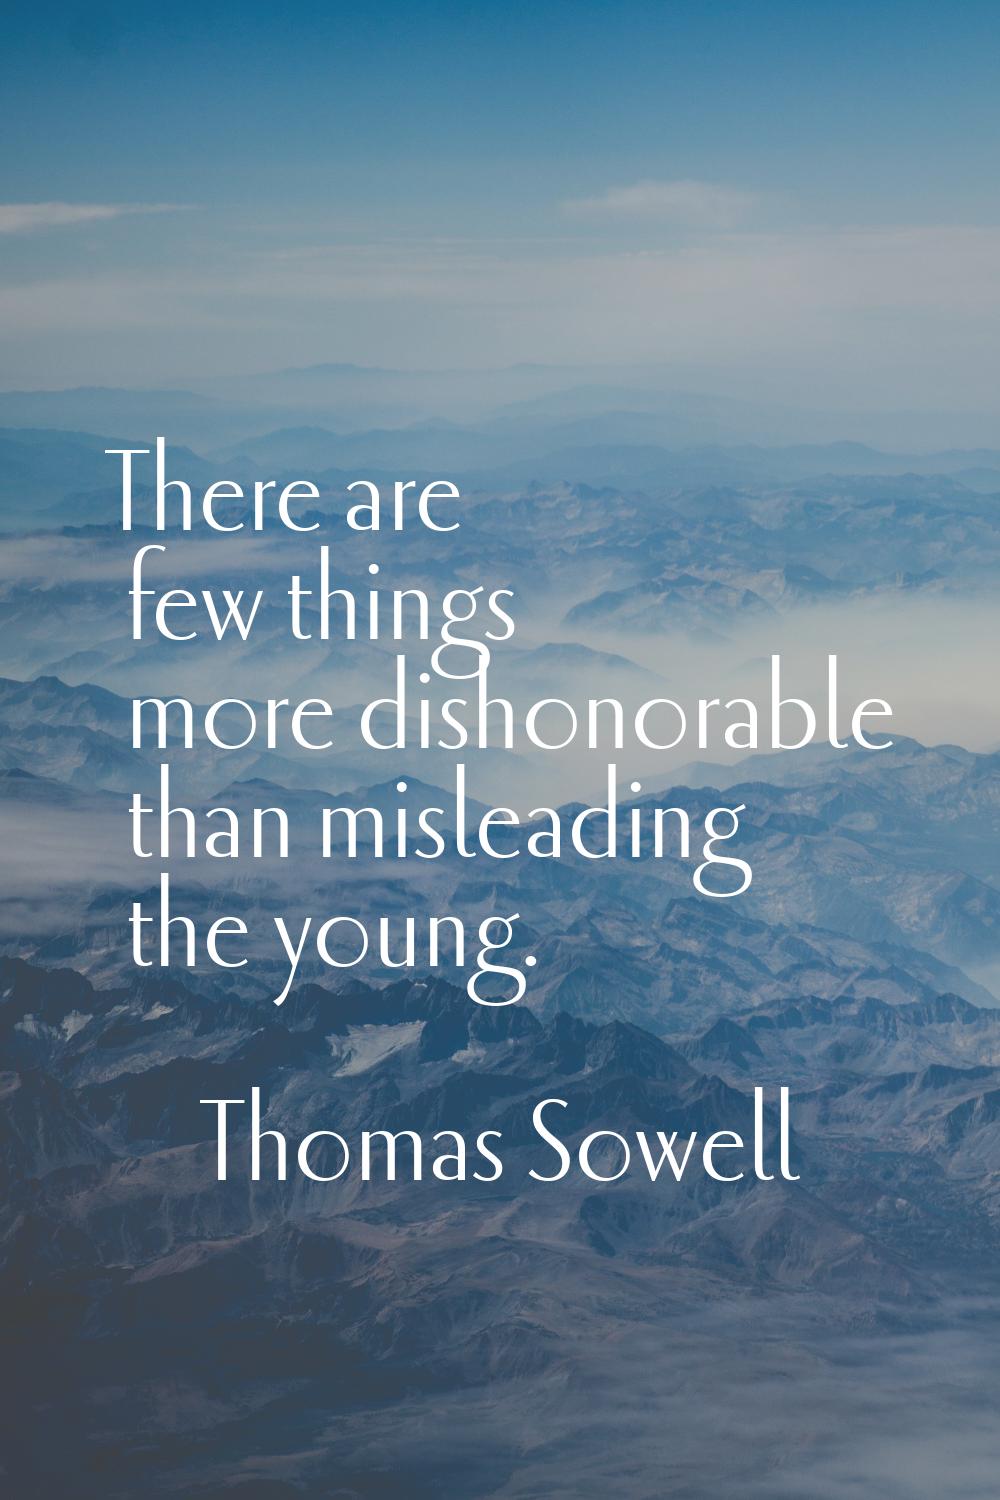 There are few things more dishonorable than misleading the young.